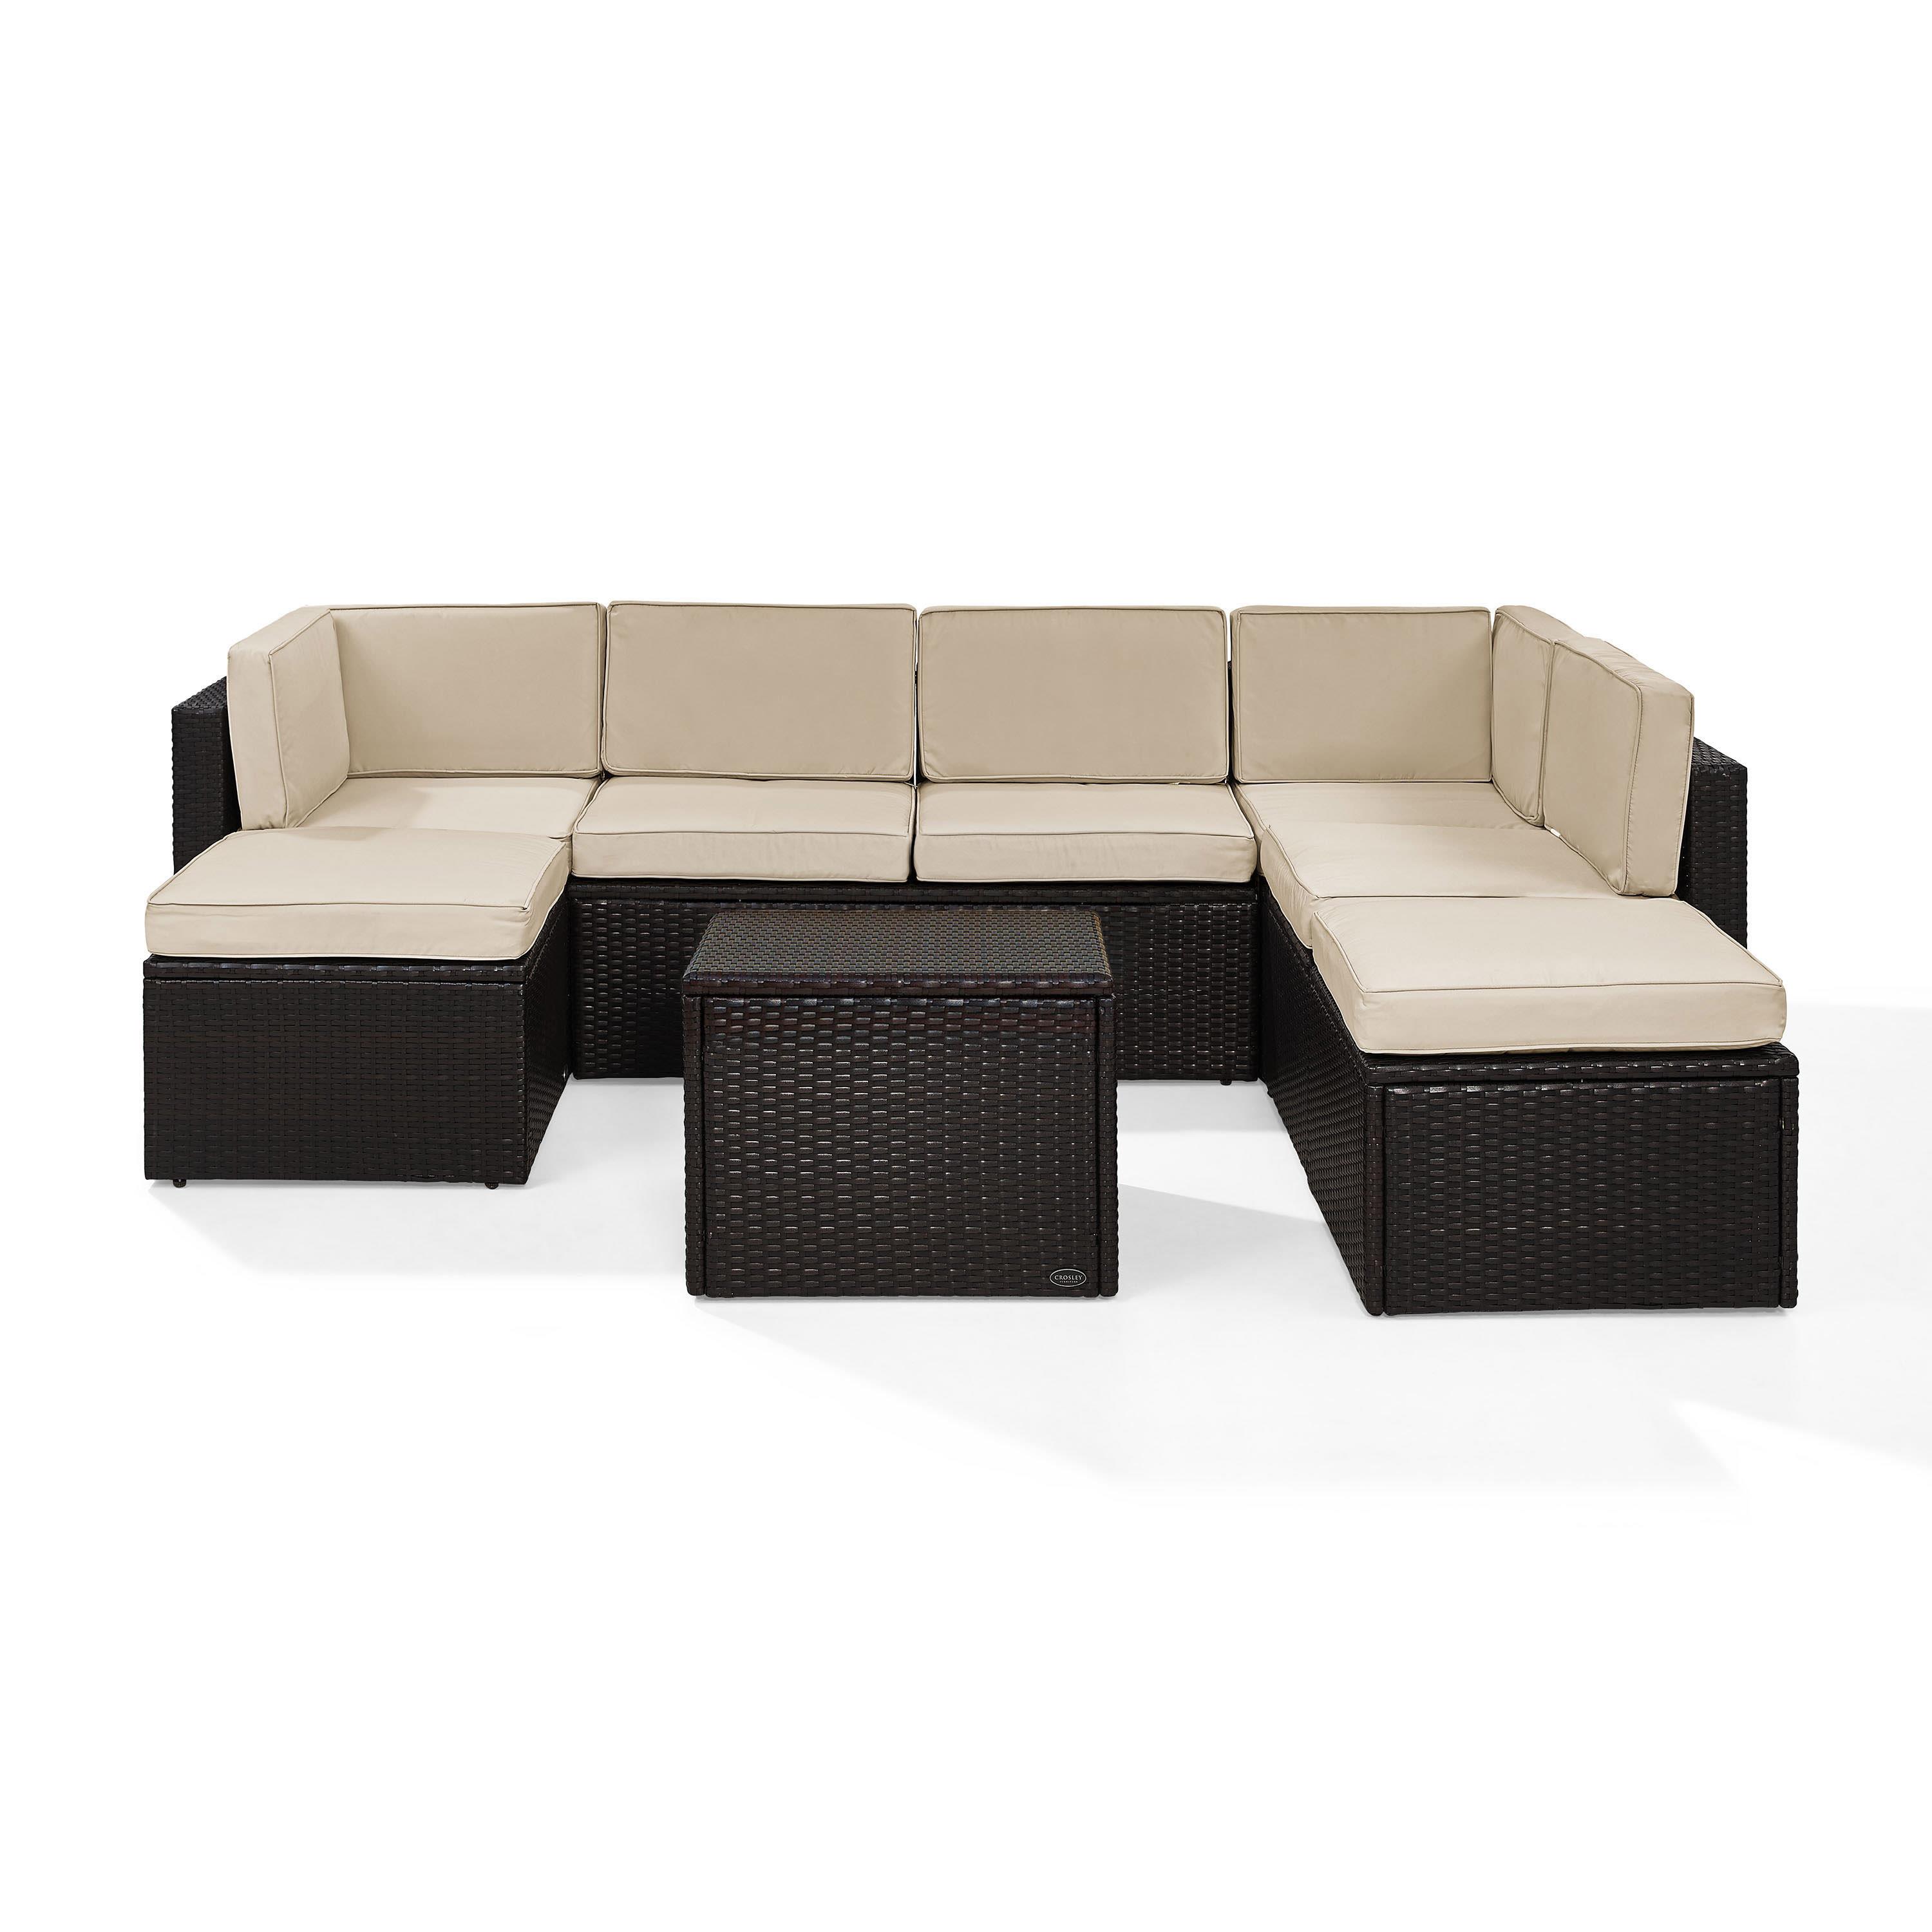 Crosley Palm Harbor 8 Piece Wicker Patio Sectional Set in Brown and Sand - image 2 of 6